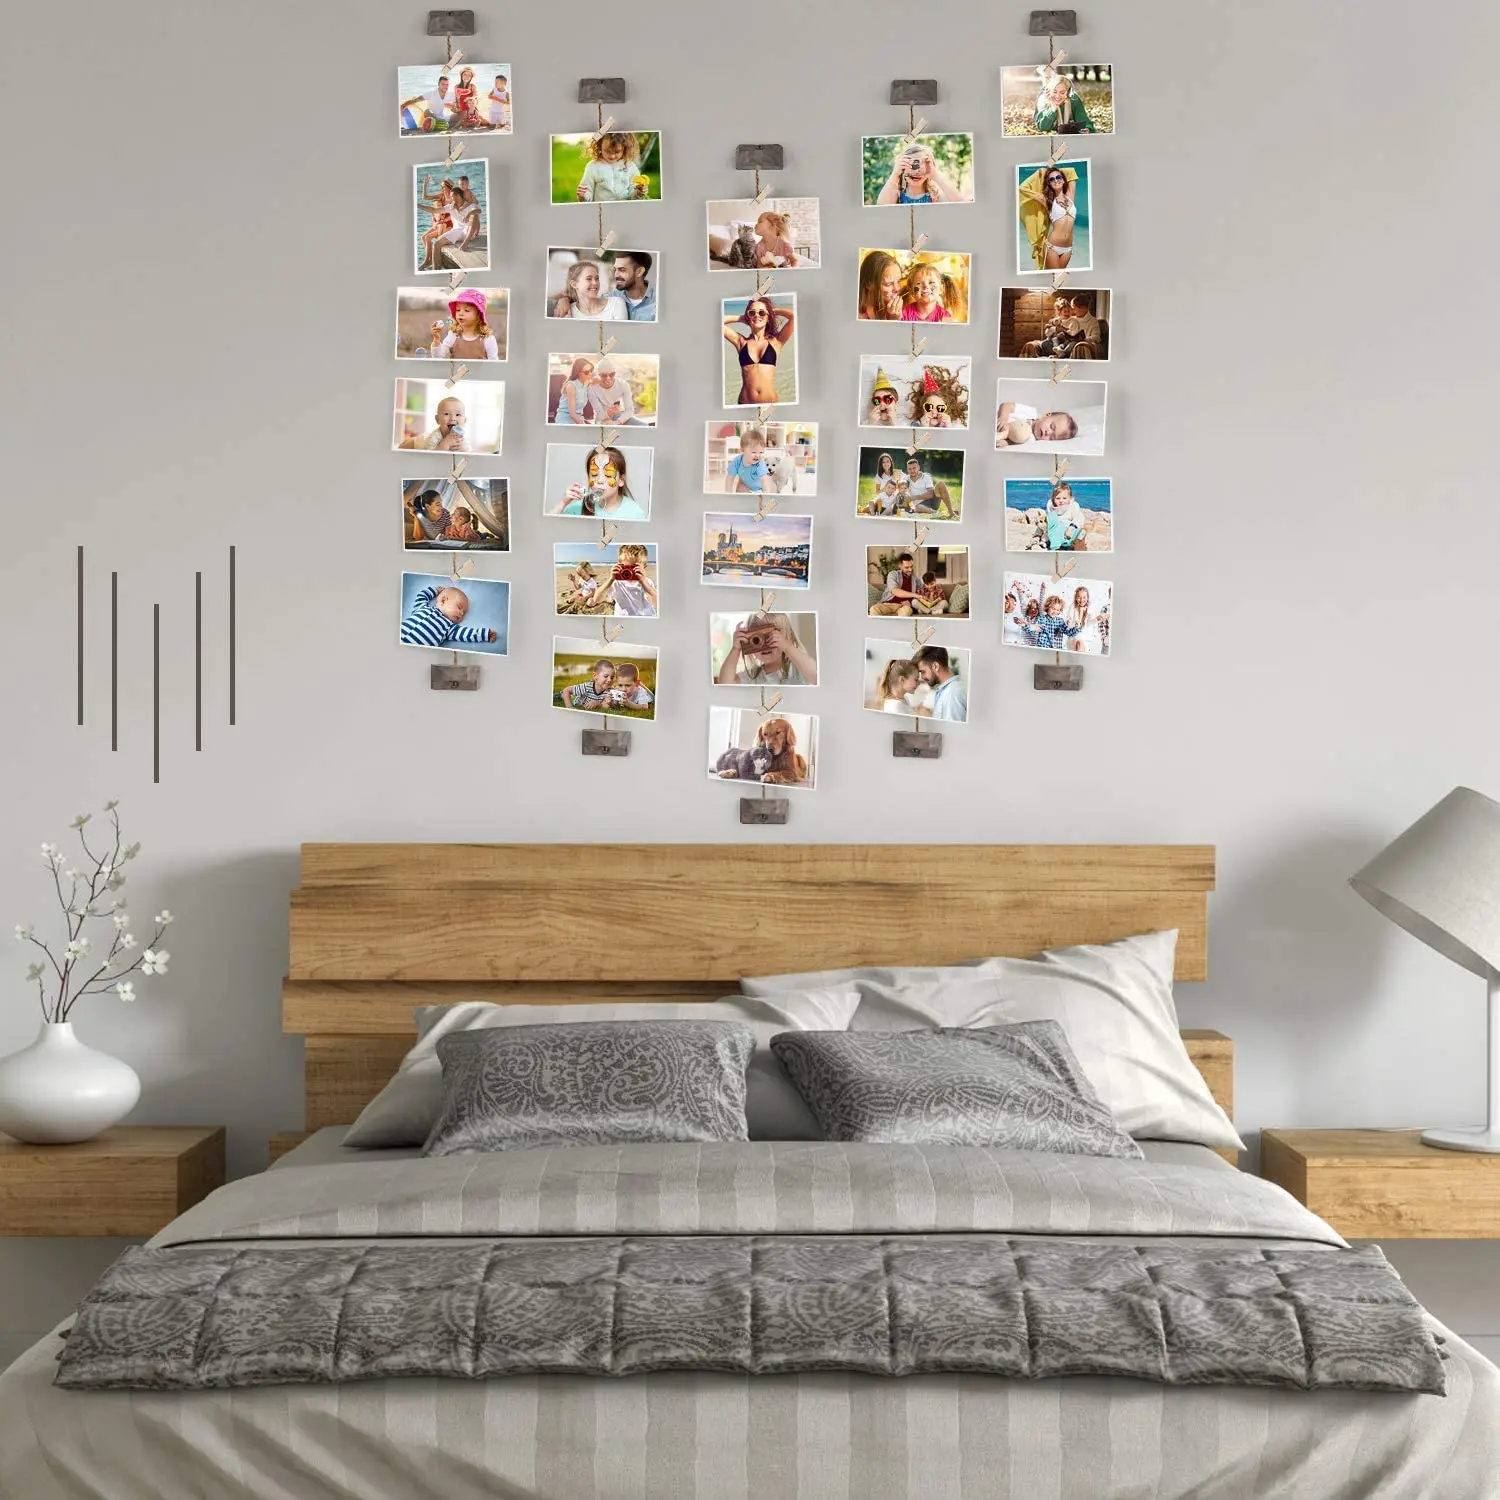 Collage Picture Frames Hanging Photo Display Rustic Wood With 30 Clips Wall 